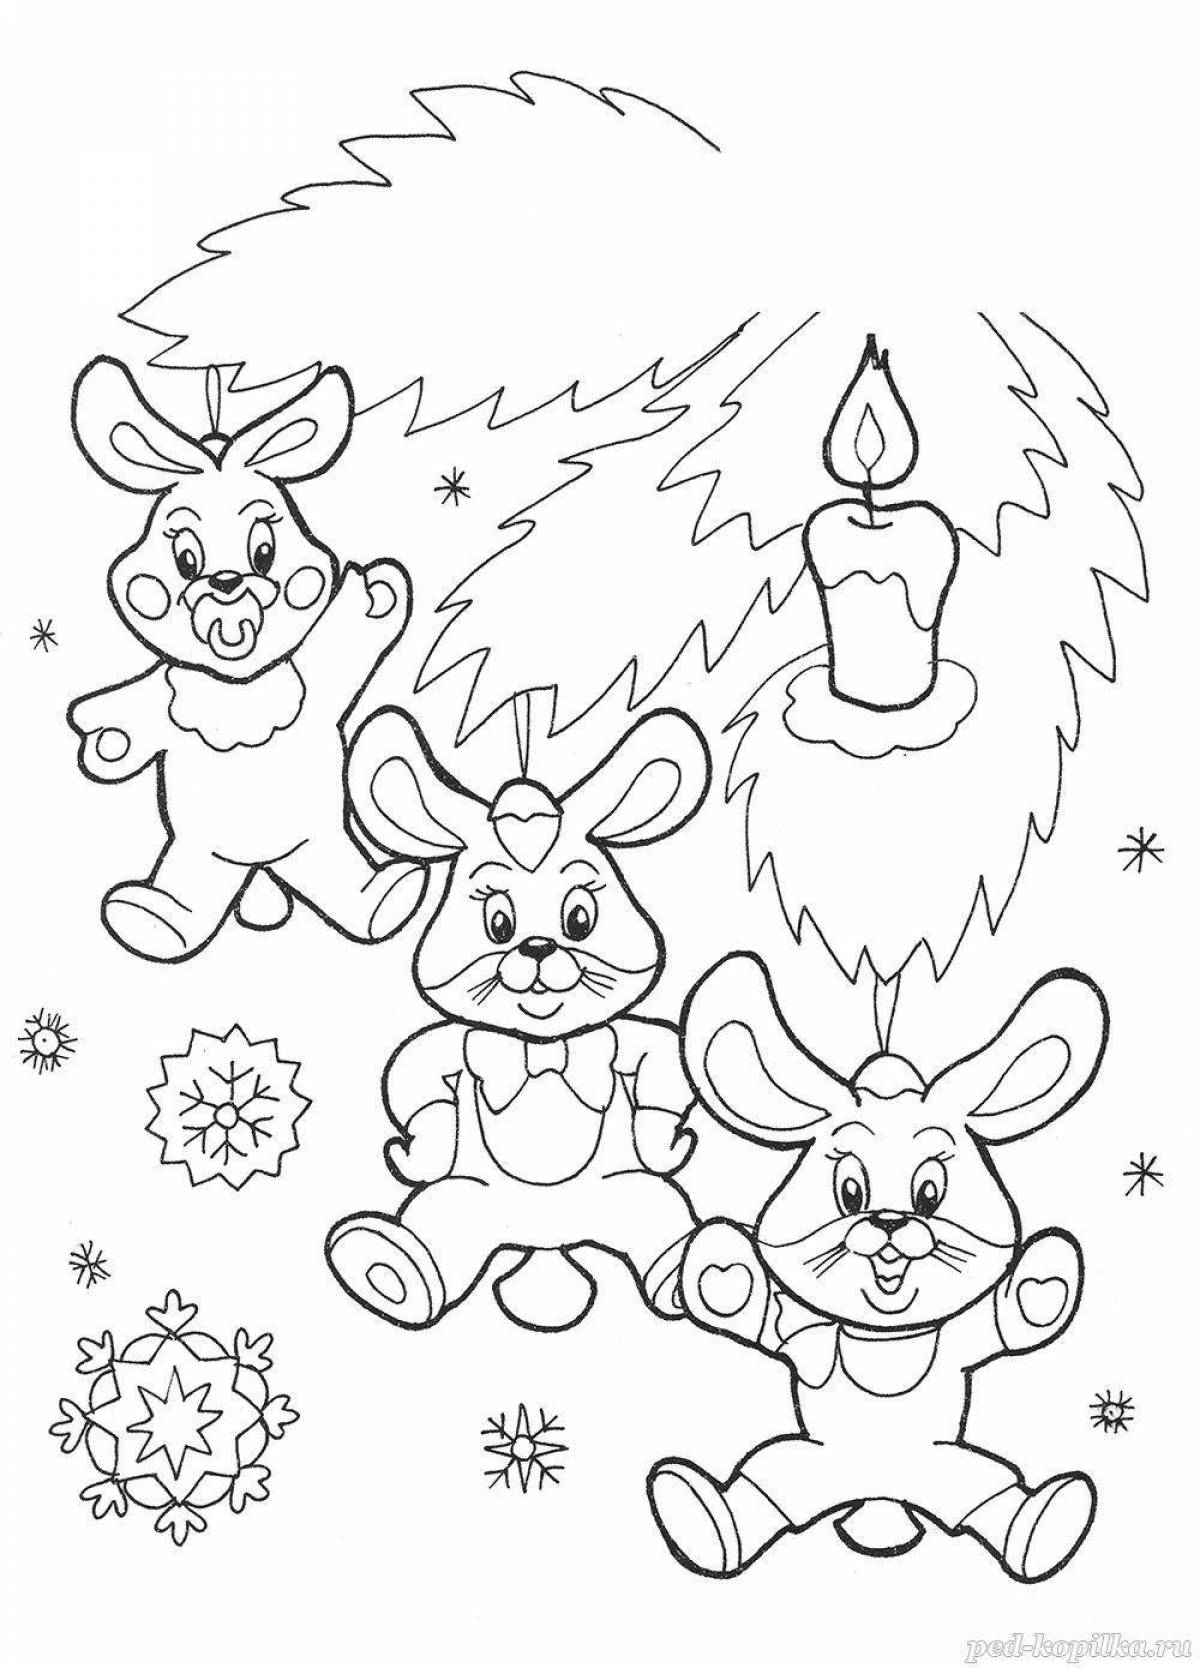 Coloring page dazzling new year 2023